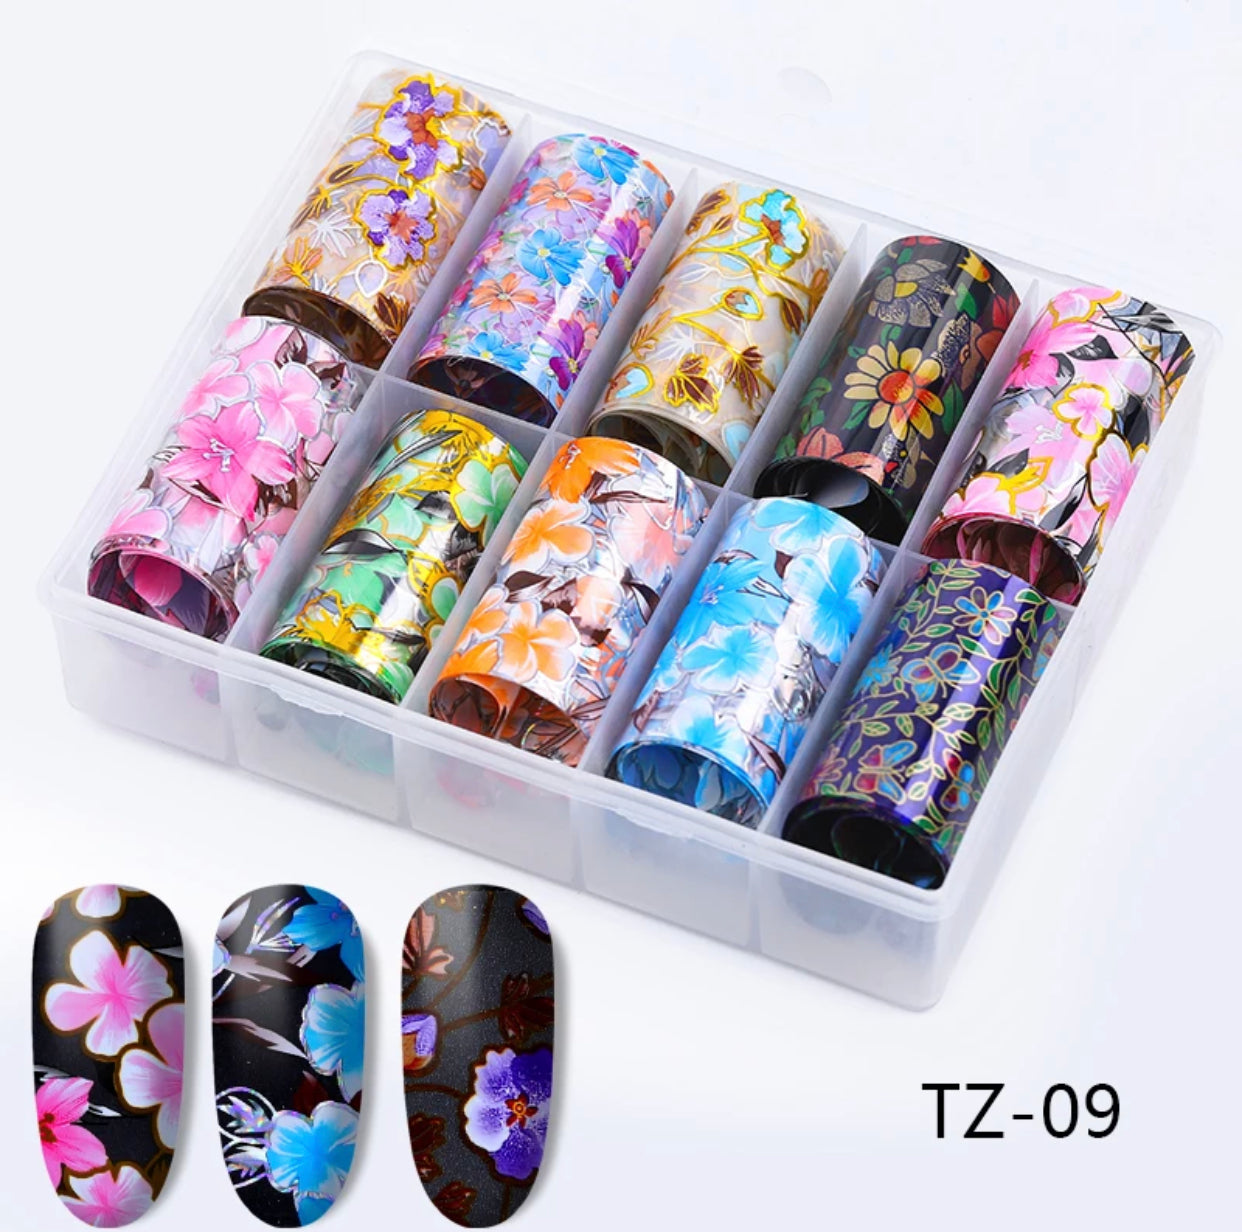 Booming Flowers Design TZ-09 - Premier Nail Supply 